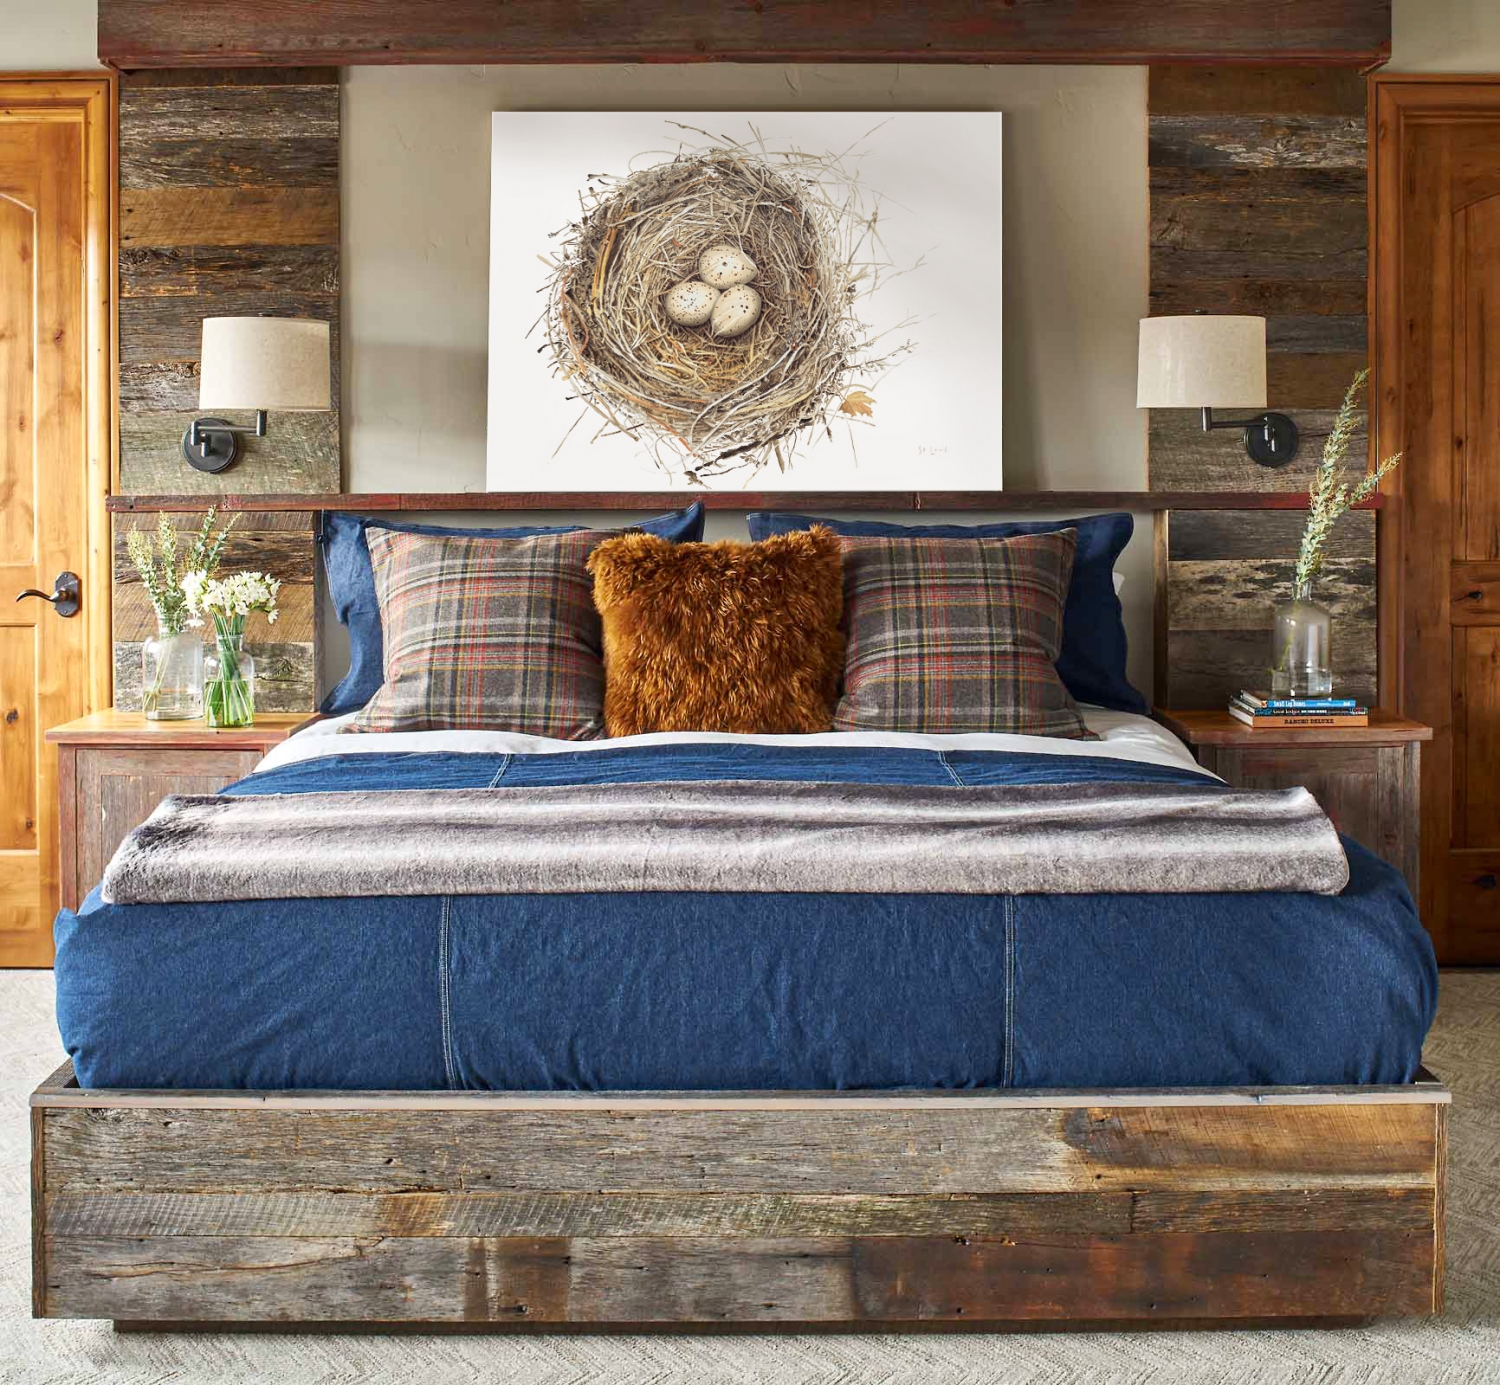 Nest Quaquail in Greenauer designed mountain bedroom photo by David Patterson